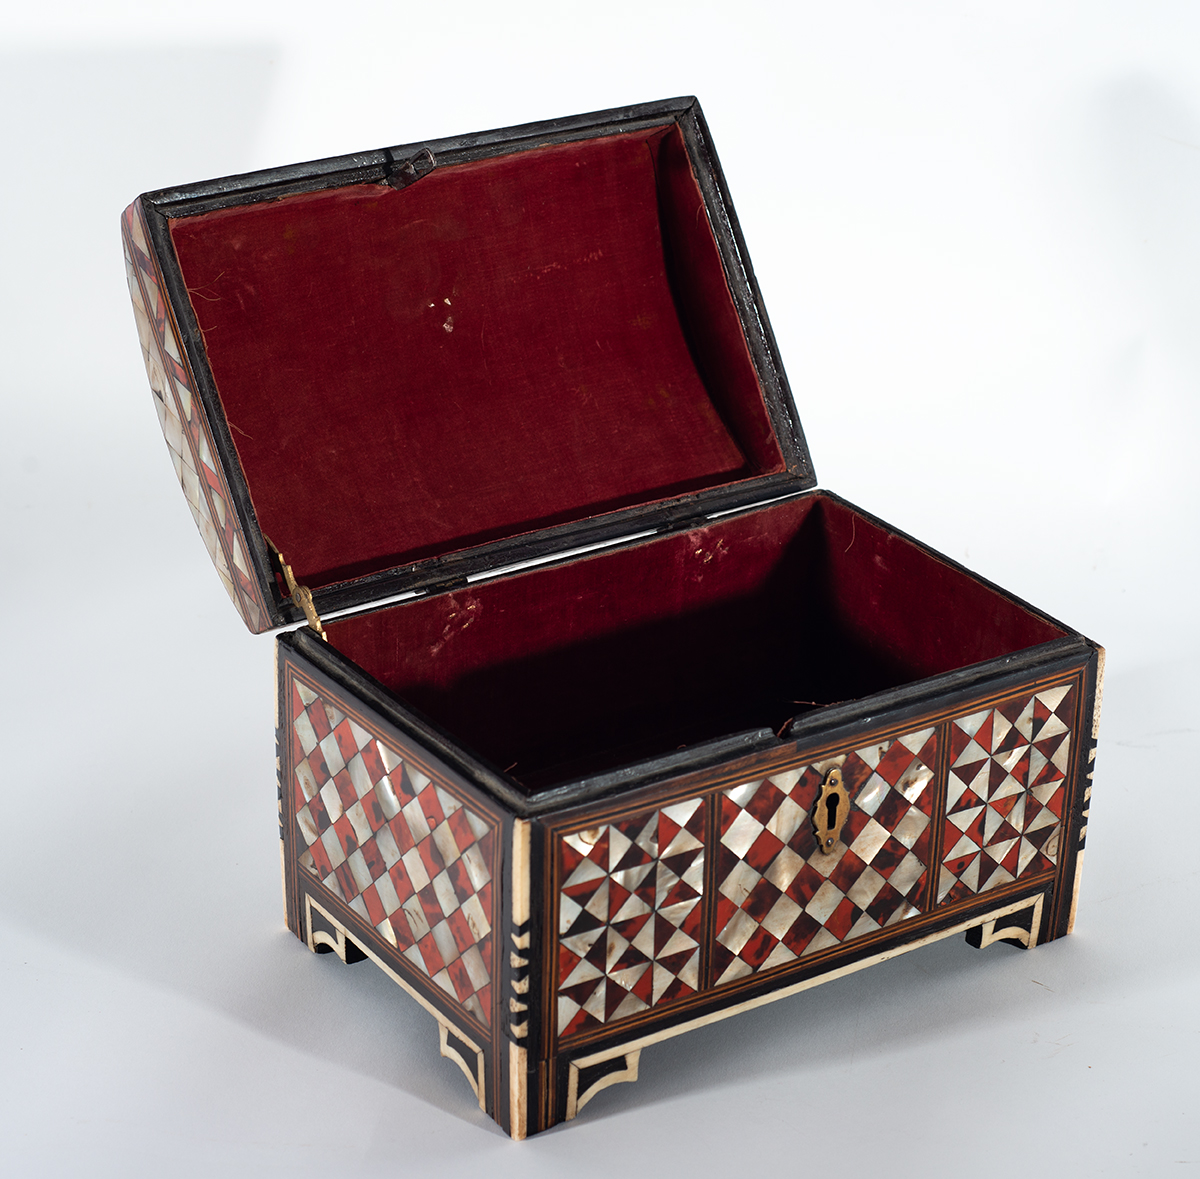 Important Ottoman chest in ebony, rosewood, mother-of-pearl and tortoiseshell, Turkey, 18th century - Image 5 of 5